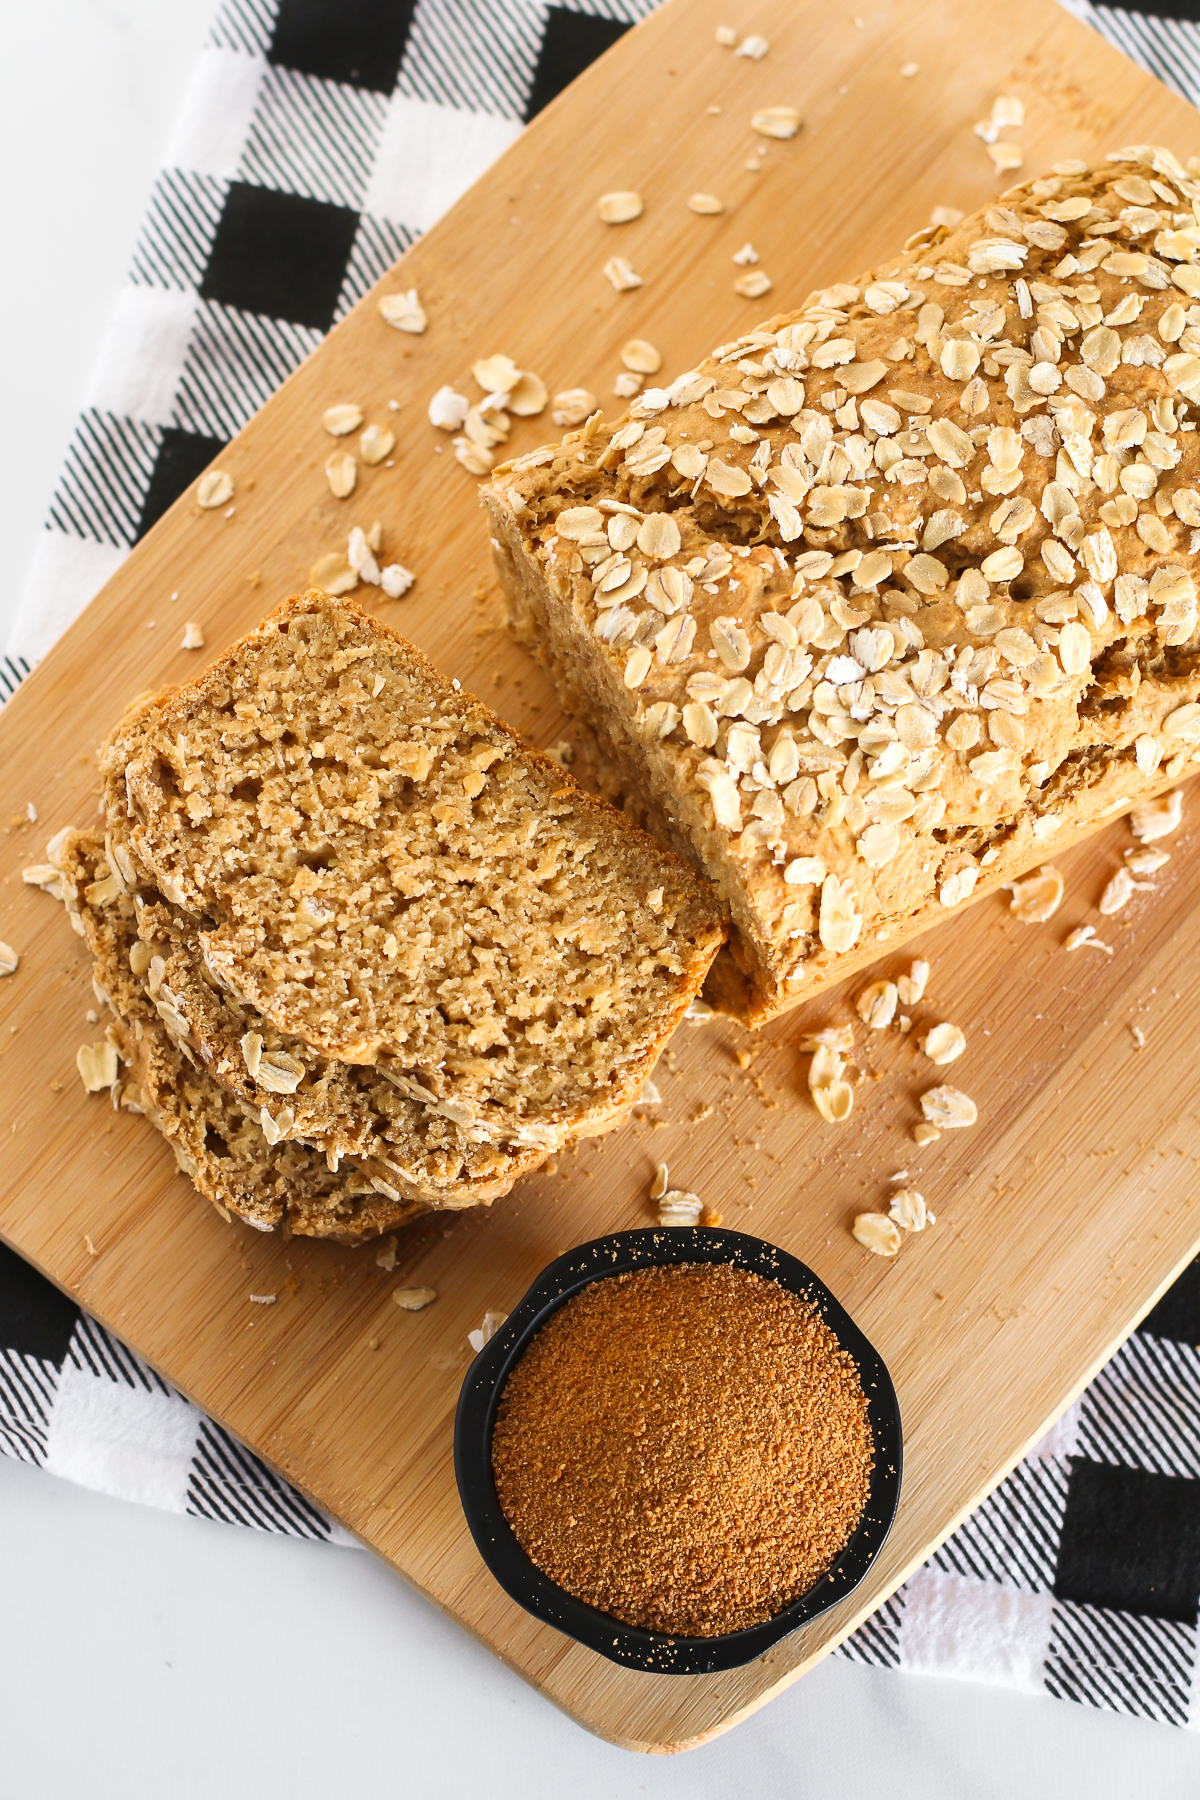 Gluten Free Vegan Oatmeal Quick Bread. Slices of soft oat bread, ready for your favorite jam or nut butter!